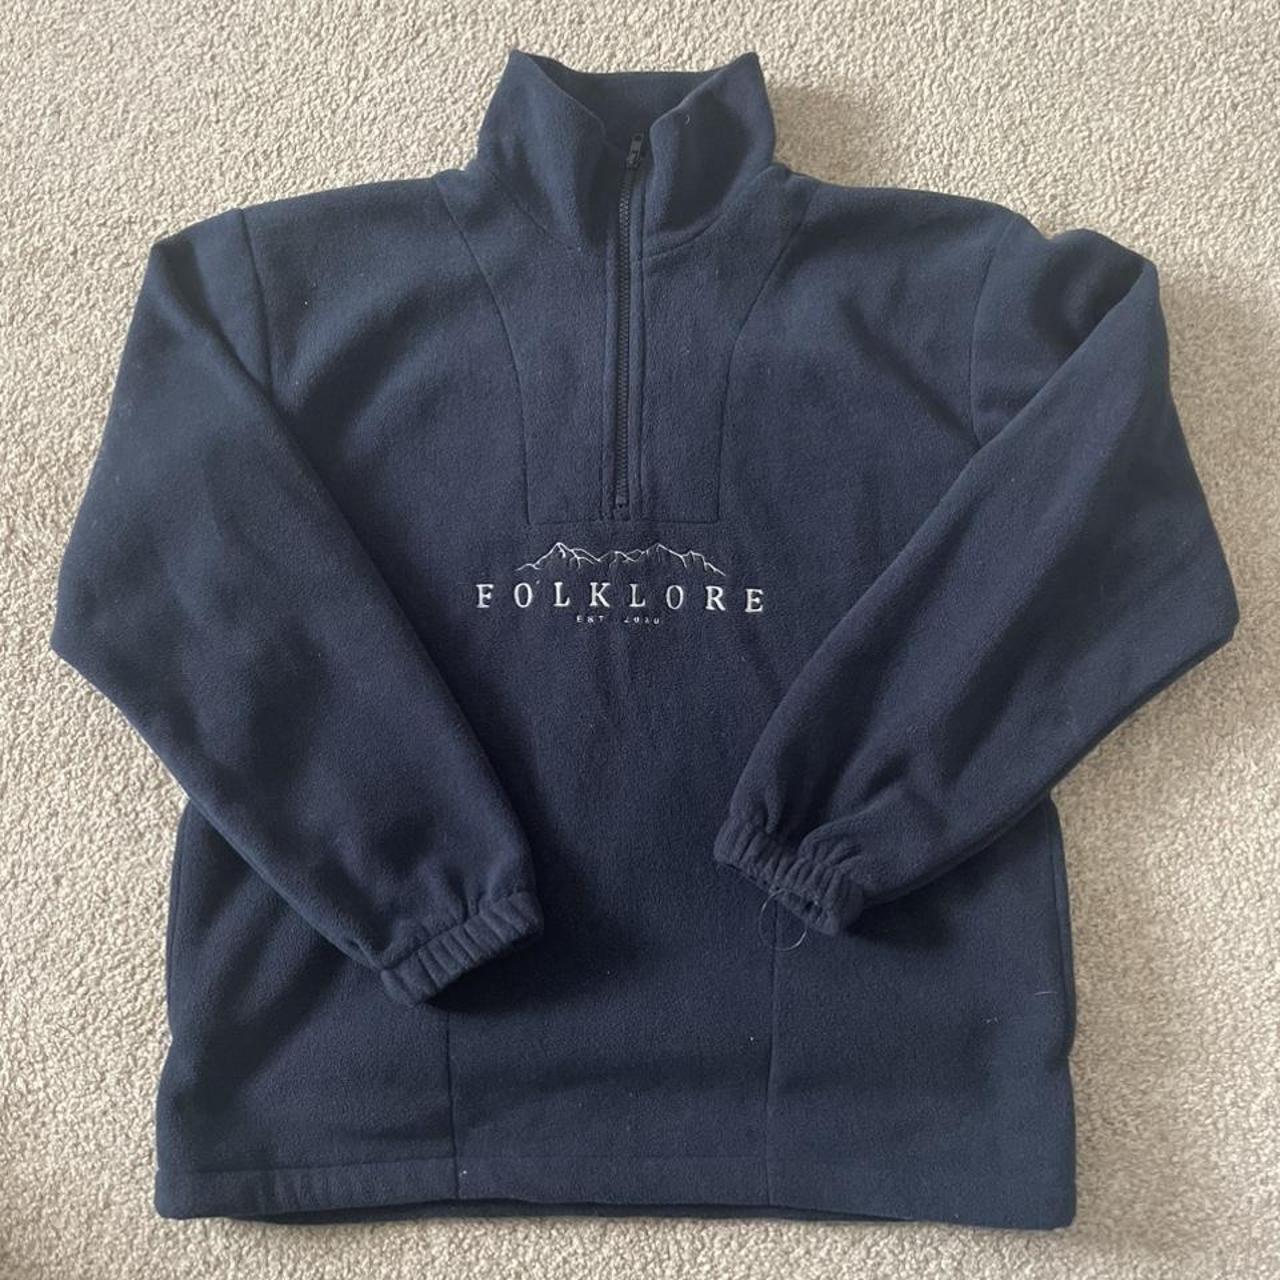 folklore embroided fleece from etsy navy taylor... - Depop